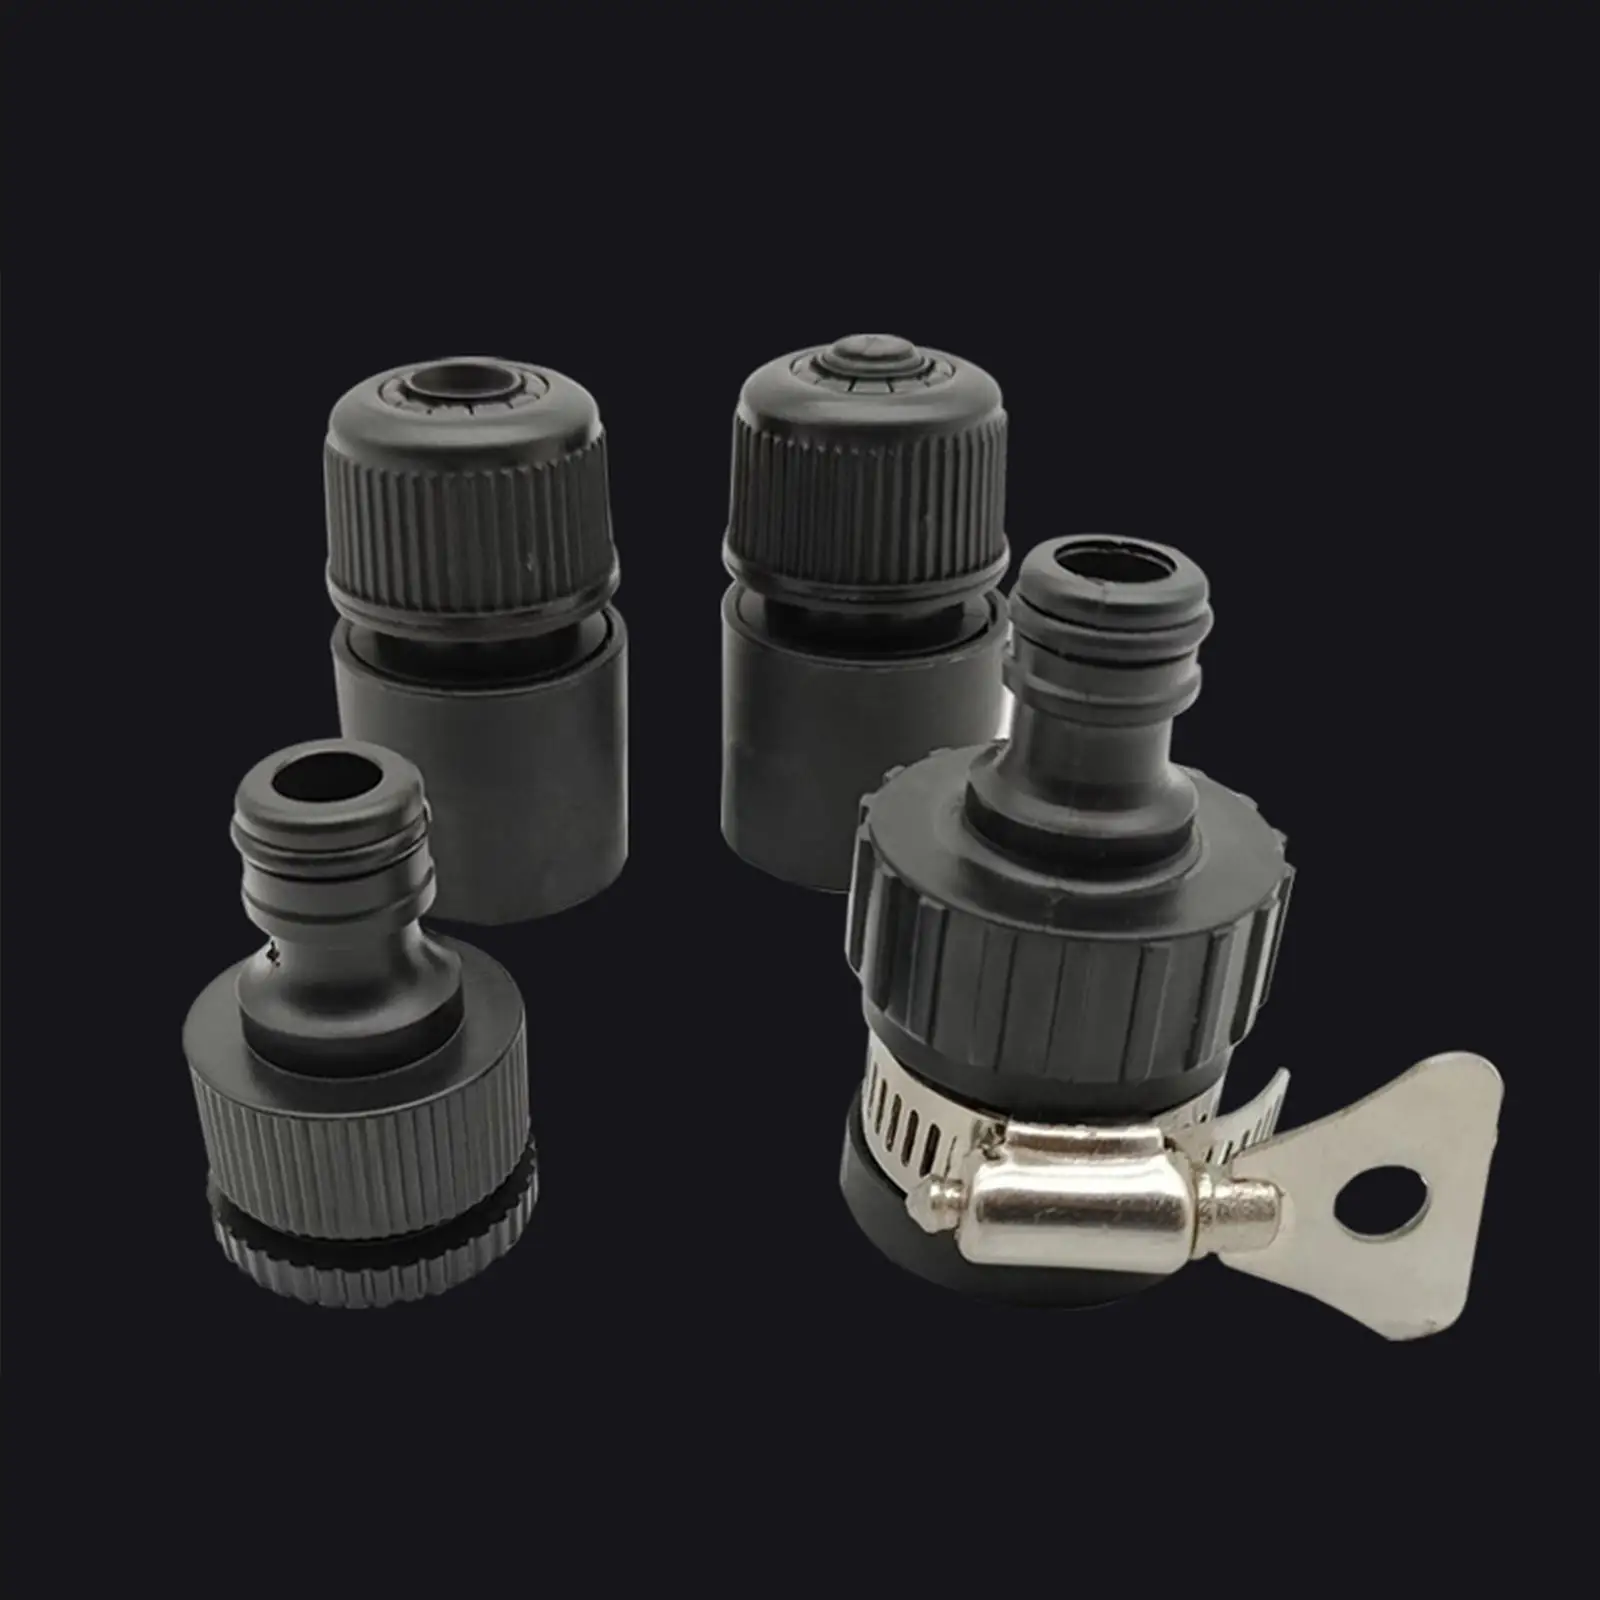 4Pcs Garden Irrigation  Connector Replacement Simple to Disassemble and Assemble Compact size fits 3/4